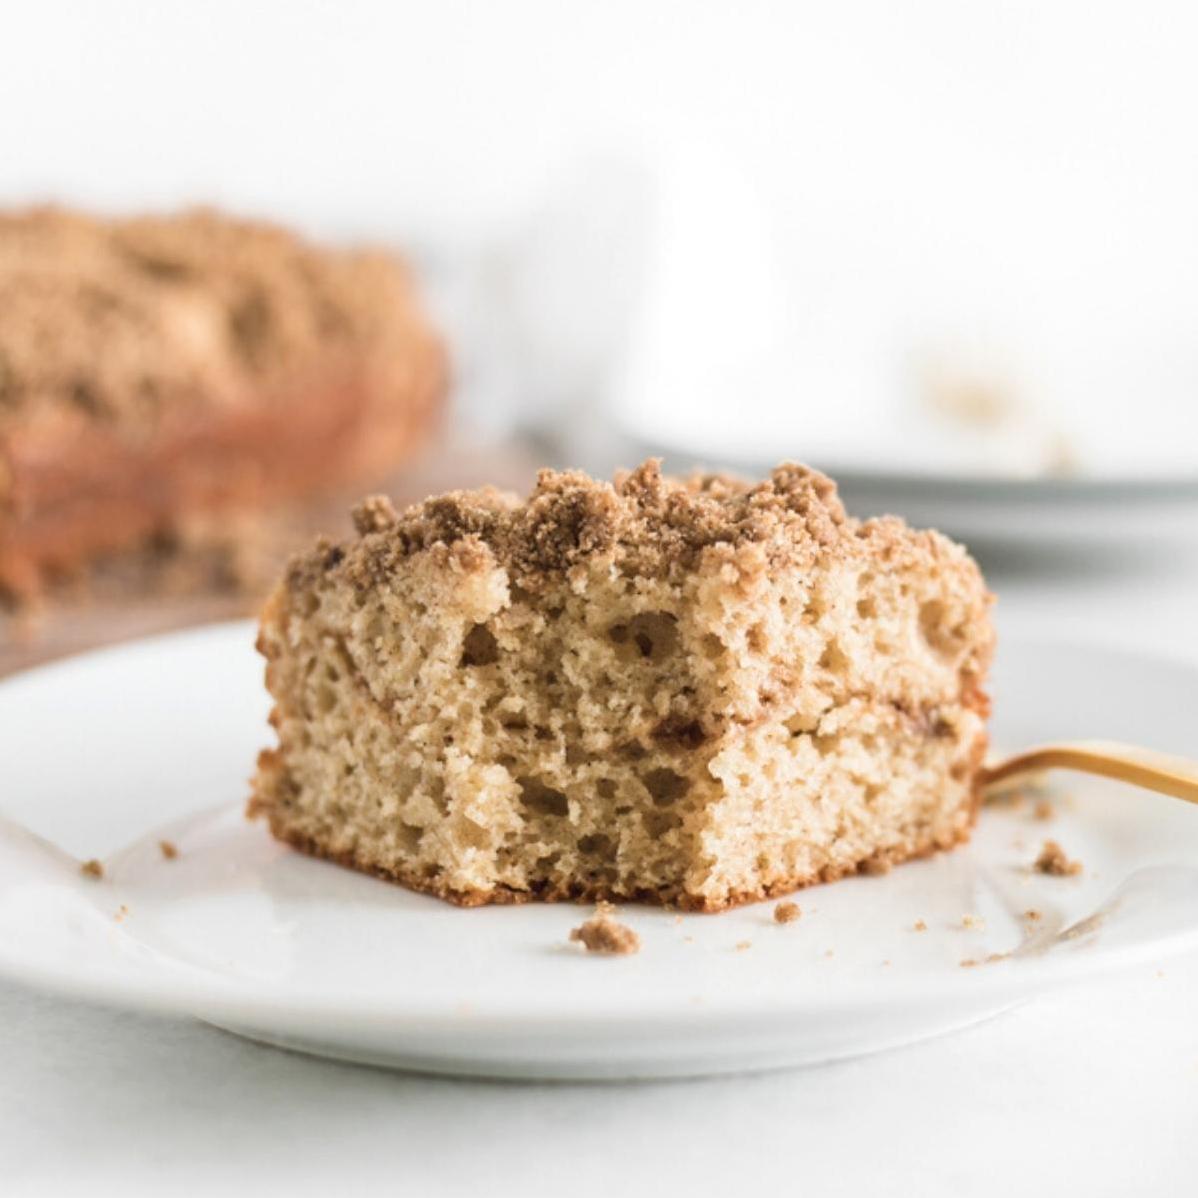  Wake up and smell the cinnamon with this gluten-free breakfast cake!